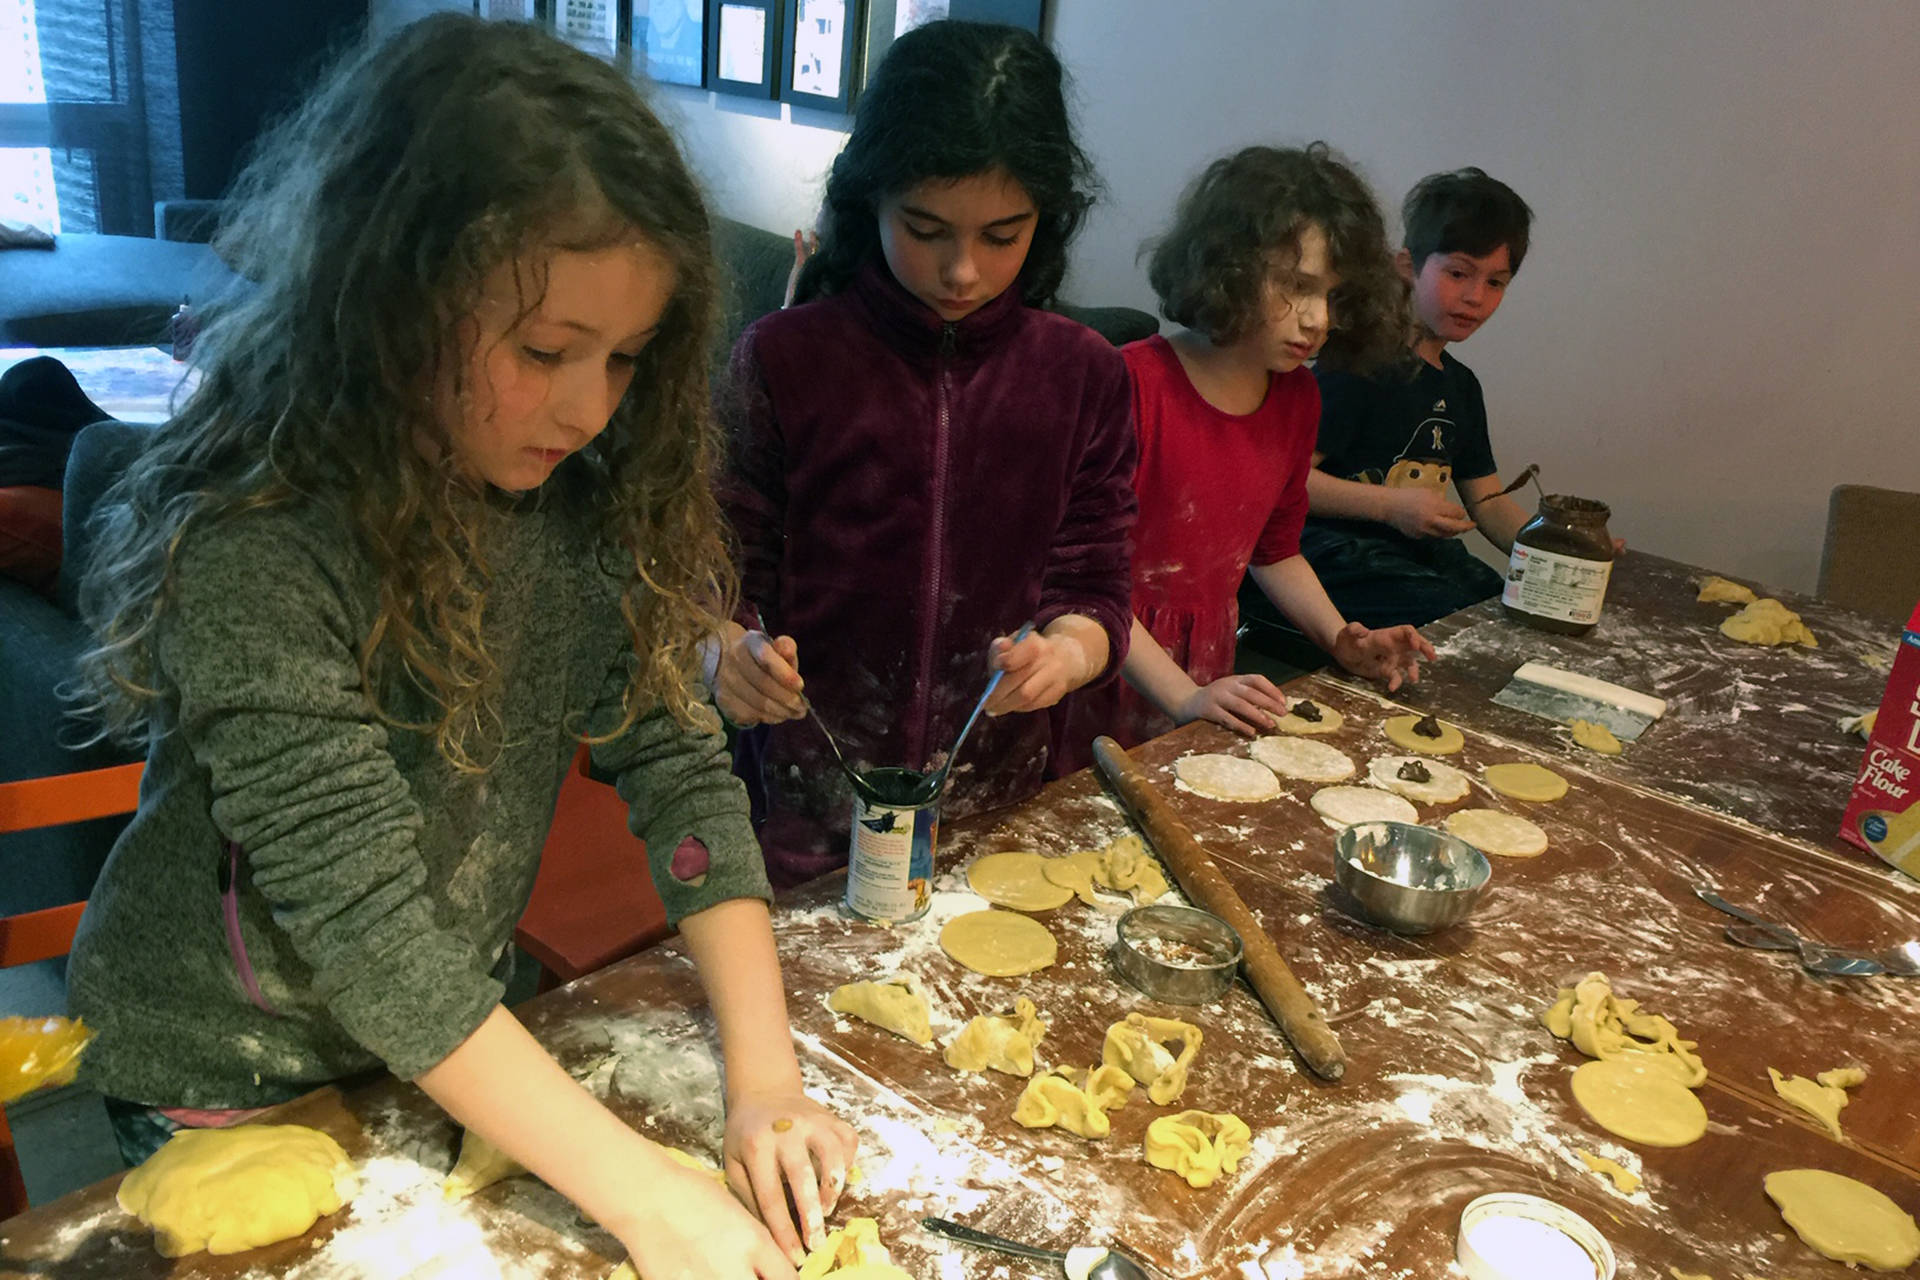 Members of local Jewish youth group Beit Sefer Sunna Schane, Gracie Snyder, Sadie Curtis and Isaac Kirsch make Hamantaschen, a traditional holiday treat, ahead of Purim. (Courtesy Photo | Congregation Sukkat Shalom)